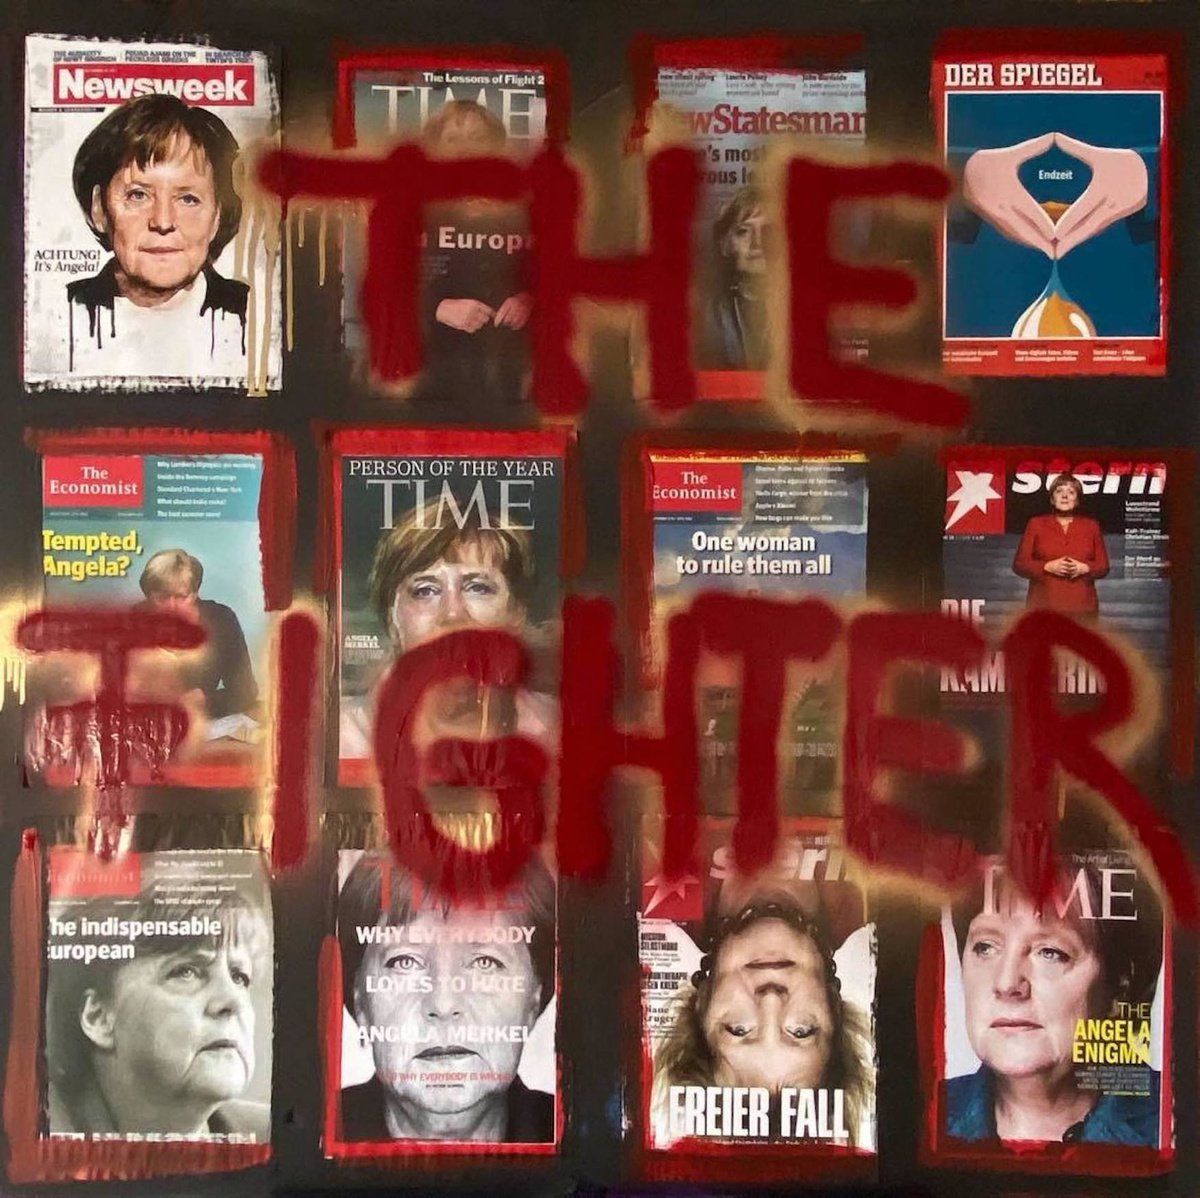 Angela Merkel - The Fighter by Jerome Cholet